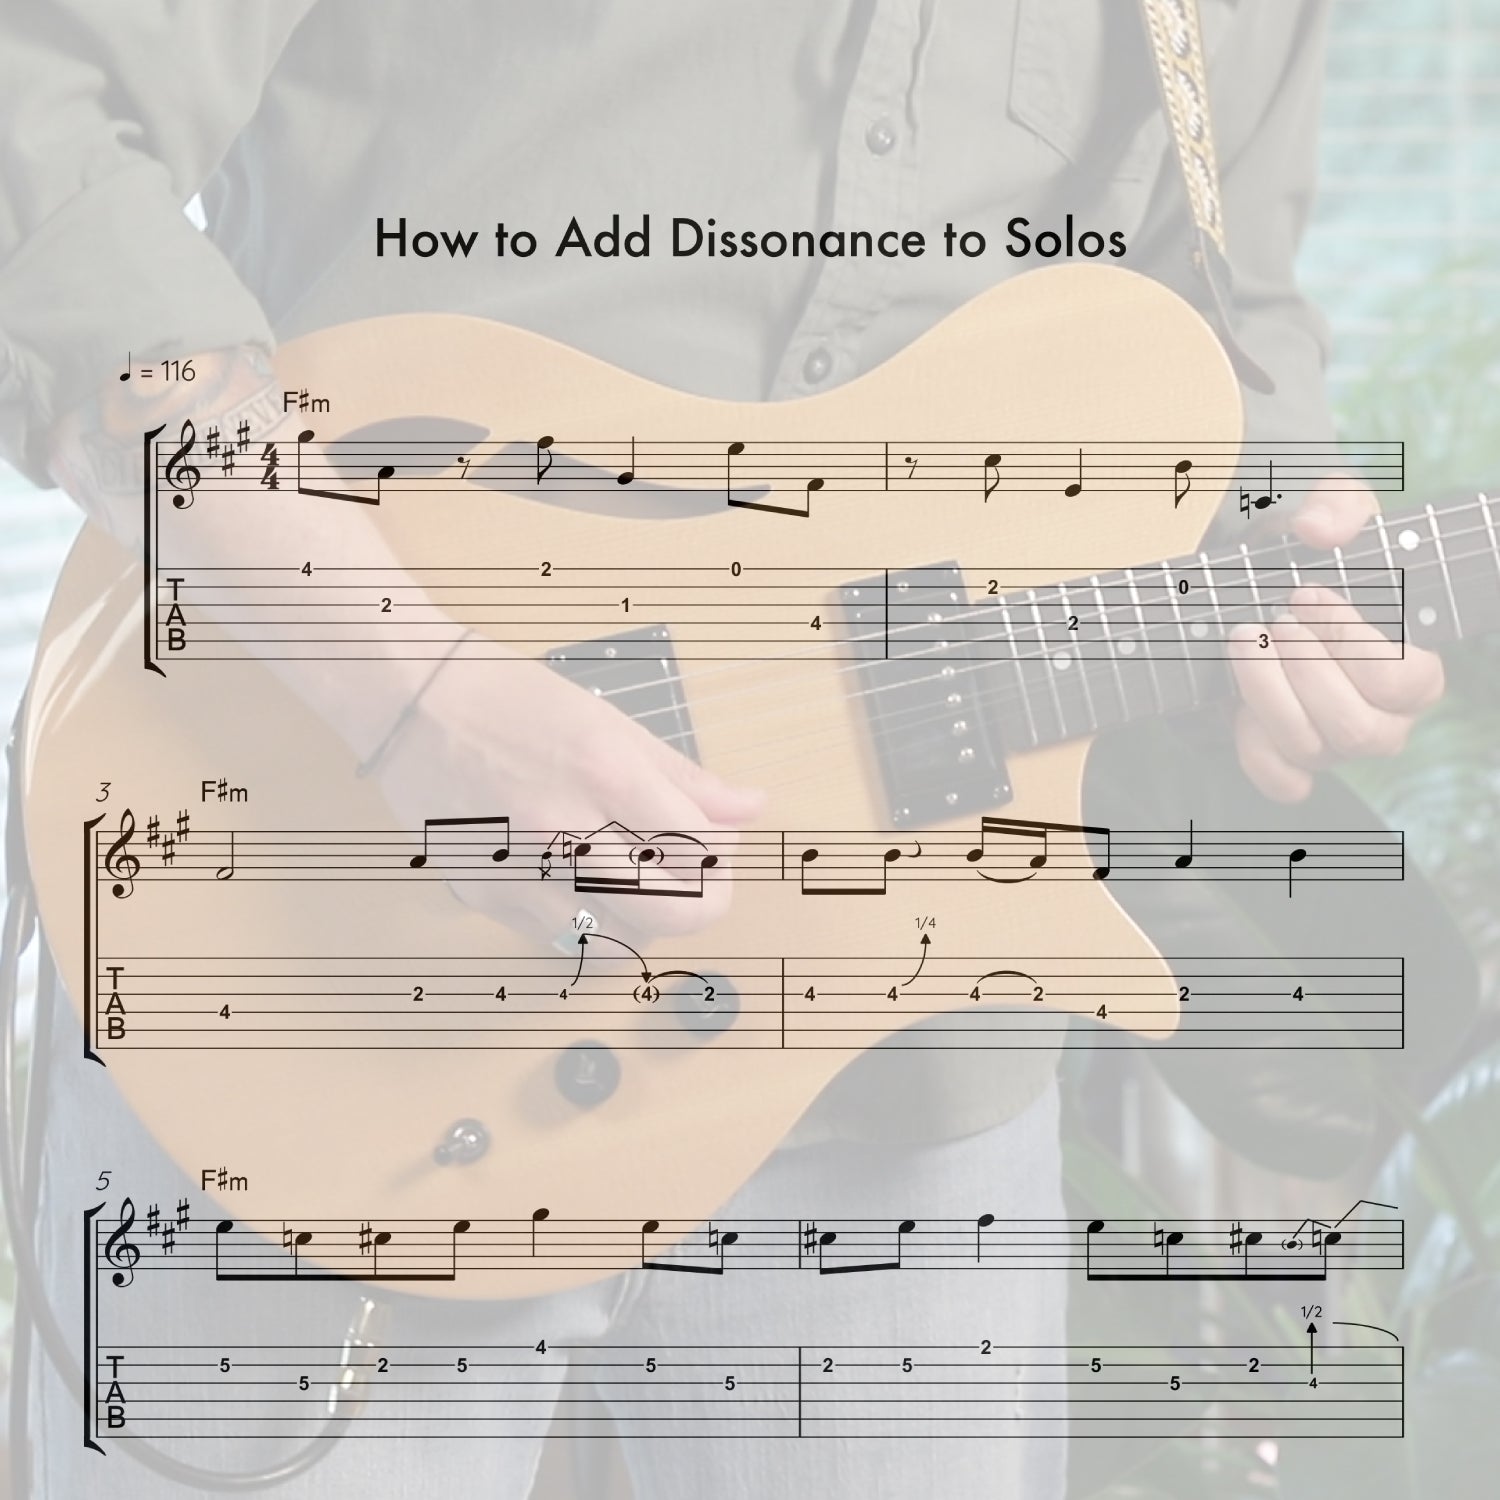 How to Add Dissonance to Solos